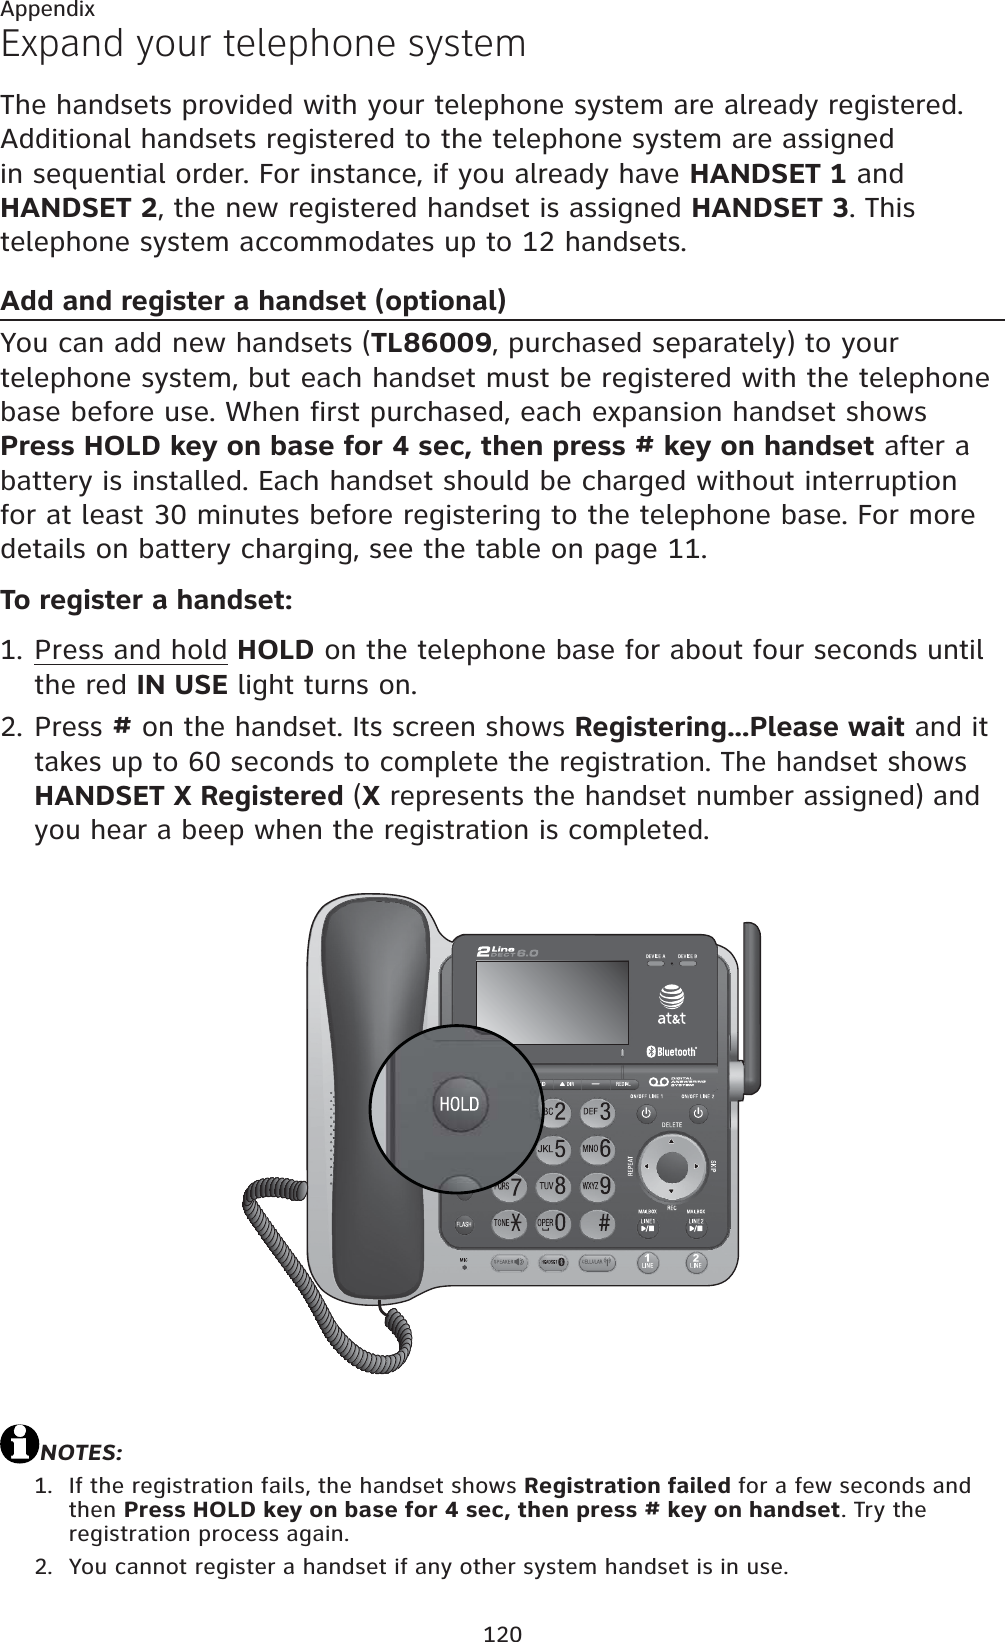 120AppendixExpand your telephone systemThe handsets provided with your telephone system are already registered. Additional handsets registered to the telephone system are assigned in sequential order. For instance, if you already have HANDSET 1 and HANDSET 2, the new registered handset is assigned HANDSET 3. This telephone system accommodates up to 12 handsets.Add and register a handset (optional)You can add new handsets (TL86009, purchased separately) to your telephone system, but each handset must be registered with the telephone base before use. When first purchased, each expansion handset shows Press HOLD key on base for 4 sec, then press # key on handset after a battery is installed. Each handset should be charged without interruption for at least 30 minutes before registering to the telephone base. For more details on battery charging, see the table on page 11.To register a handset:Press and hold HOLD on the telephone base for about four seconds until the red IN USE light turns on.Press # on the handset. Its screen shows Registering...Please wait and it takes up to 60 seconds to complete the registration. The handset shows HANDSET X Registered (X represents the handset number assigned) and you hear a beep when the registration is completed.NOTES:If the registration fails, the handset shows Registration failed for a few seconds and then Press HOLD key on base for 4 sec, then press # key on handset. Try the registration process again.You cannot register a handset if any other system handset is in use.1.2.1.2.